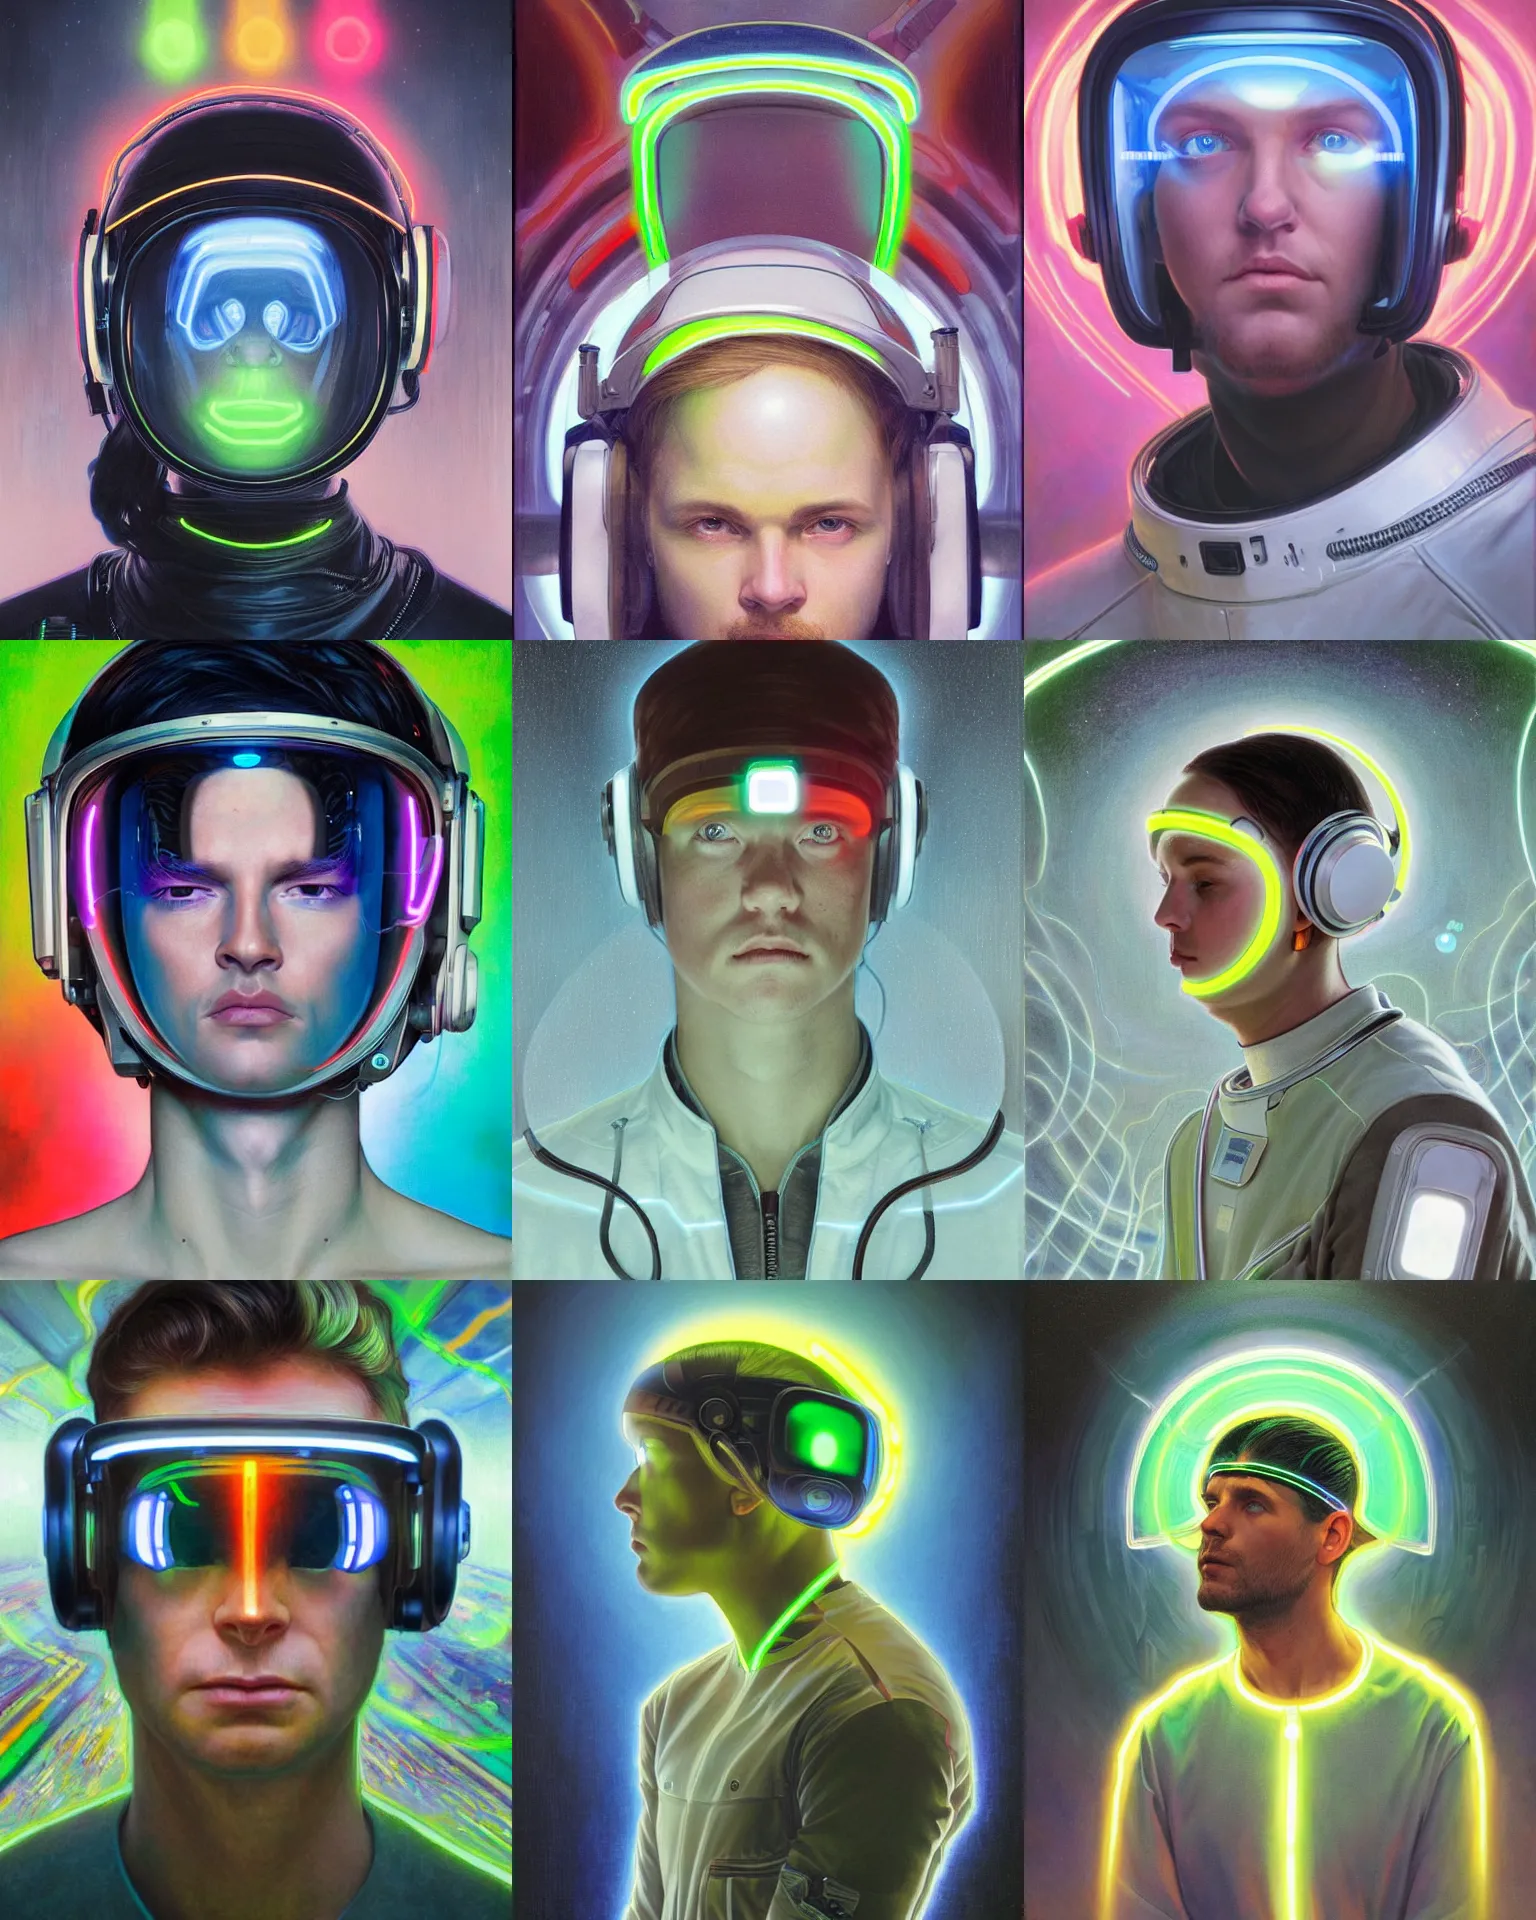 Prompt: future coder looking on, glowing visor over eyes with sleek neon headset, neon accents, desaturated headshot portrait painting by donato giancola, dean cornwall, rhads, edmund dulac, alex grey, alphonse mucha, astronaut cyberpunk electric fashion photography white stubble 8 5 mm